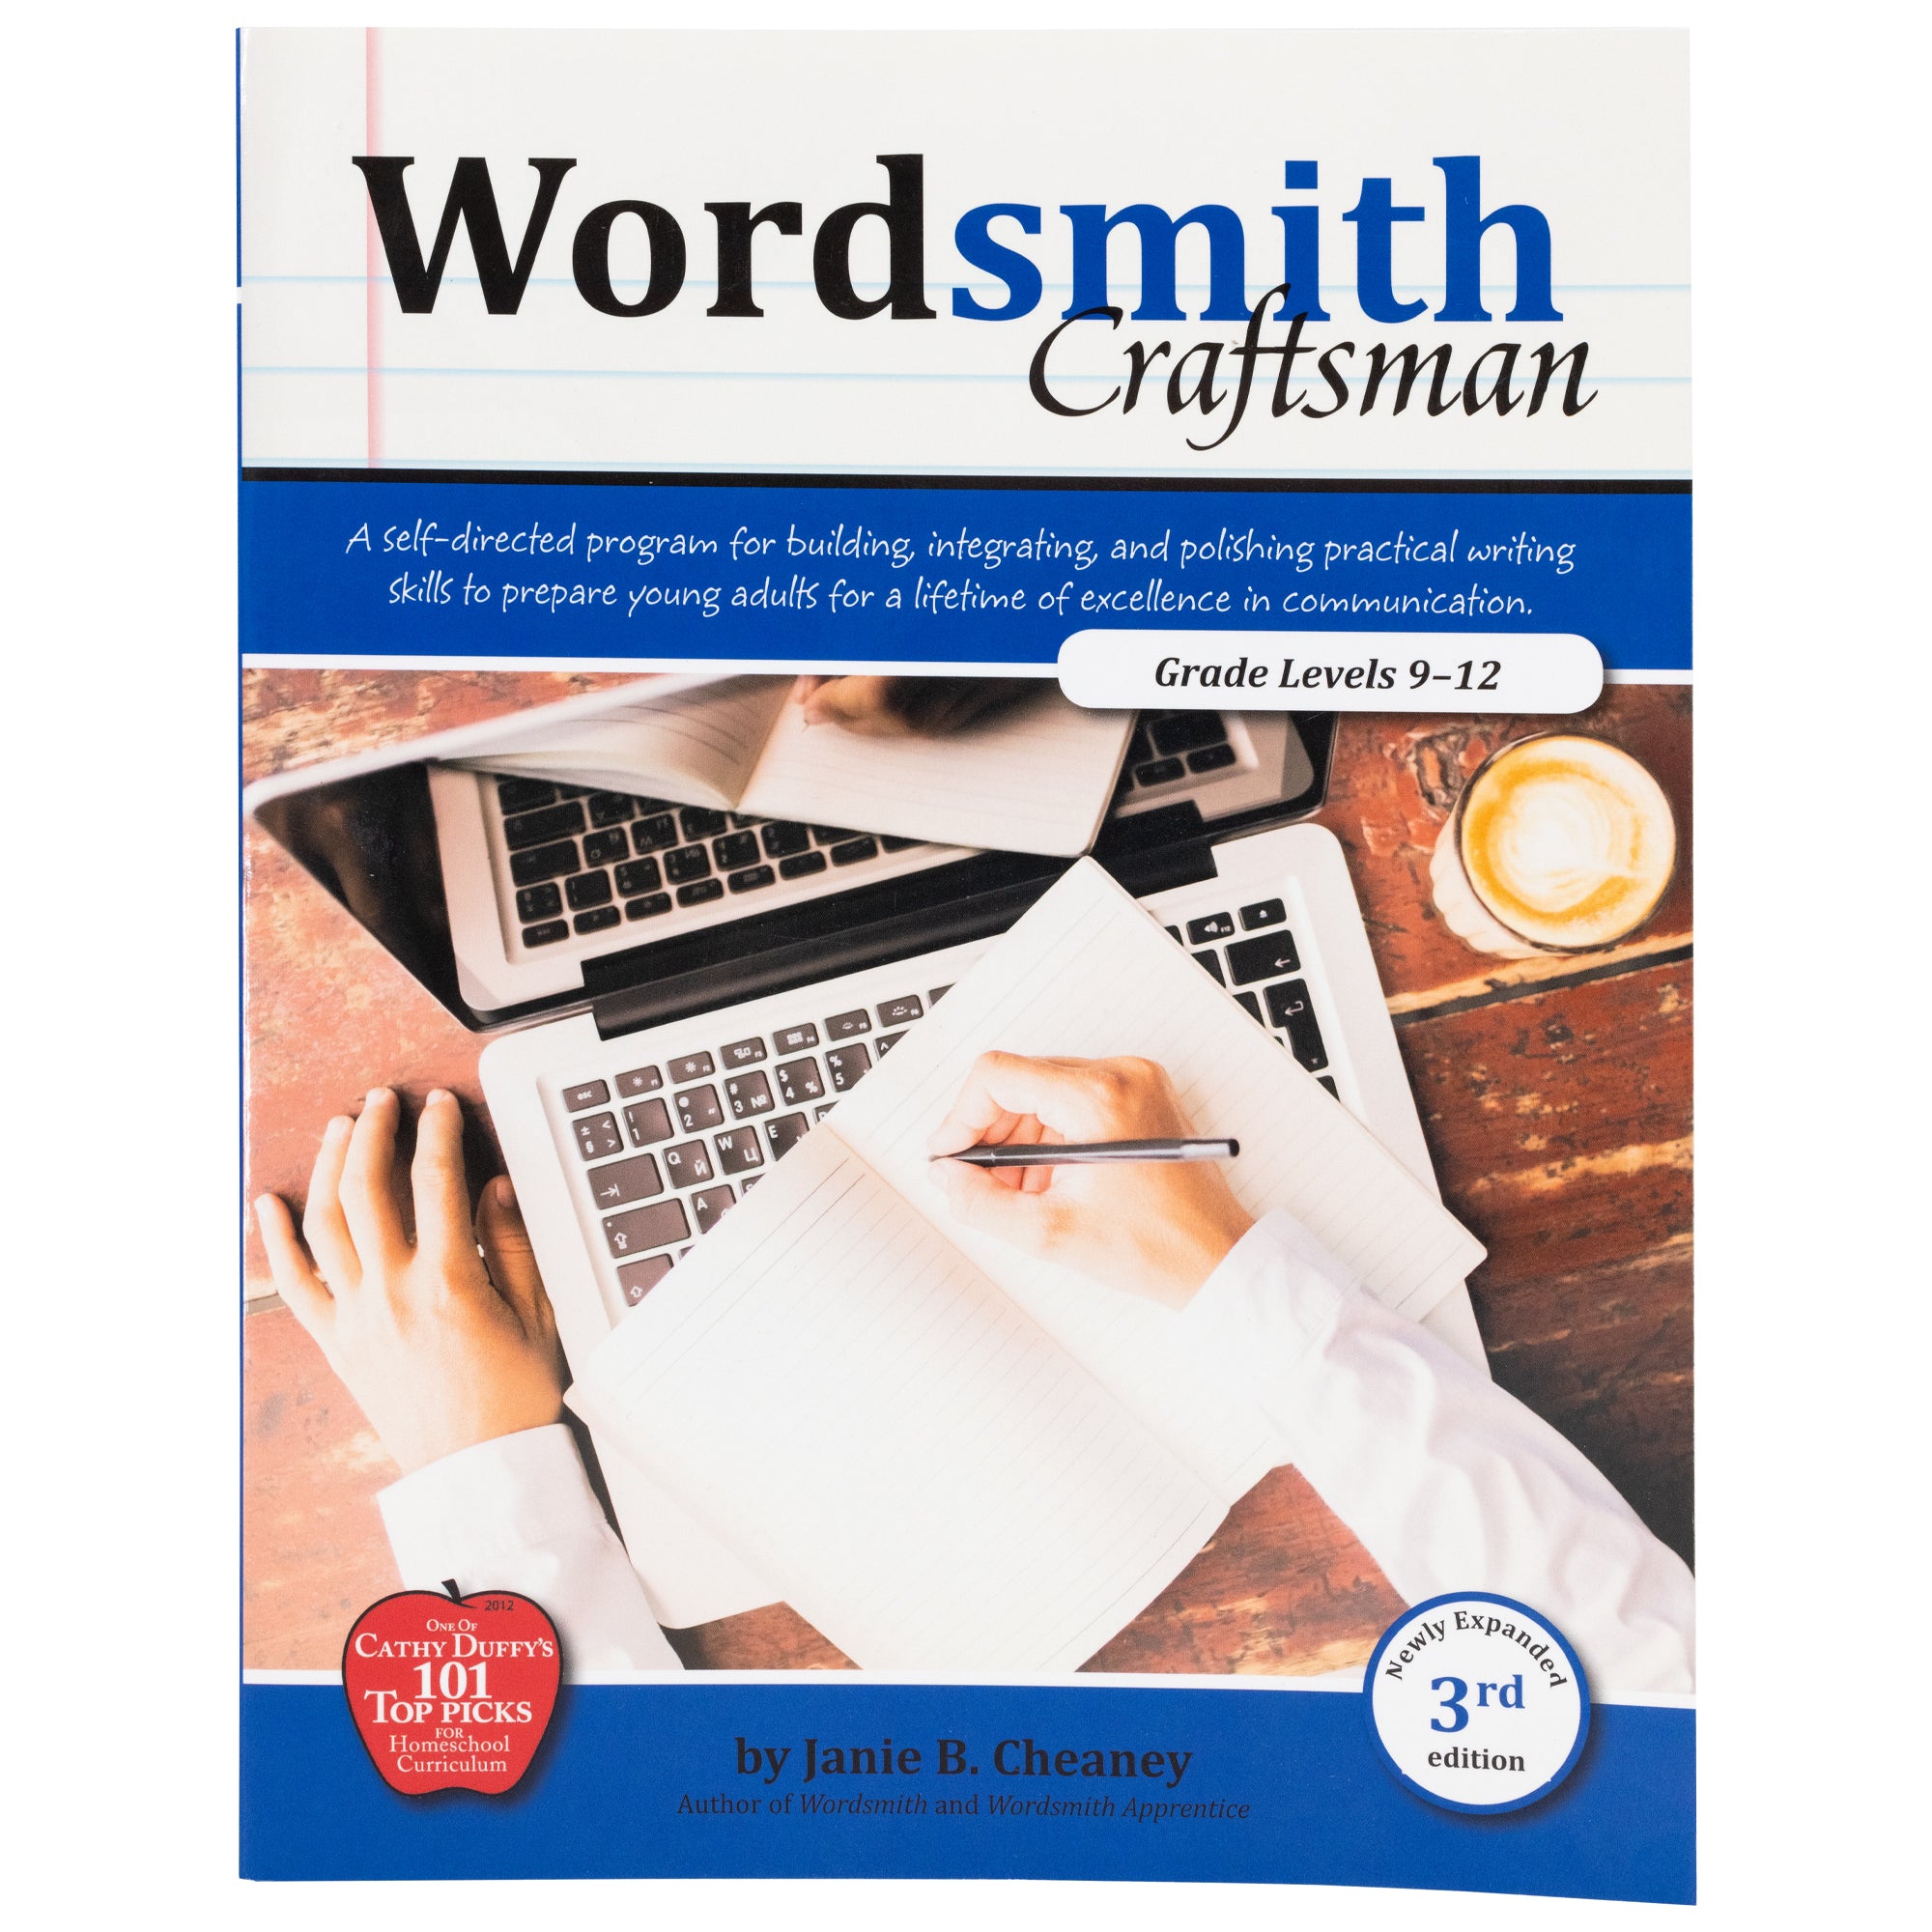 Wordsmith Craftsman cover. The background shows a notebook page at the top with the title over the top of it. Under that are 2 blue stripes. In between the stripes is a picture of a child's arms. The left arm is resting on a wood table. The right arm in writing in a notebook that is set on top of a laptop keyboard. To the right is a glass with a cream colored drink.